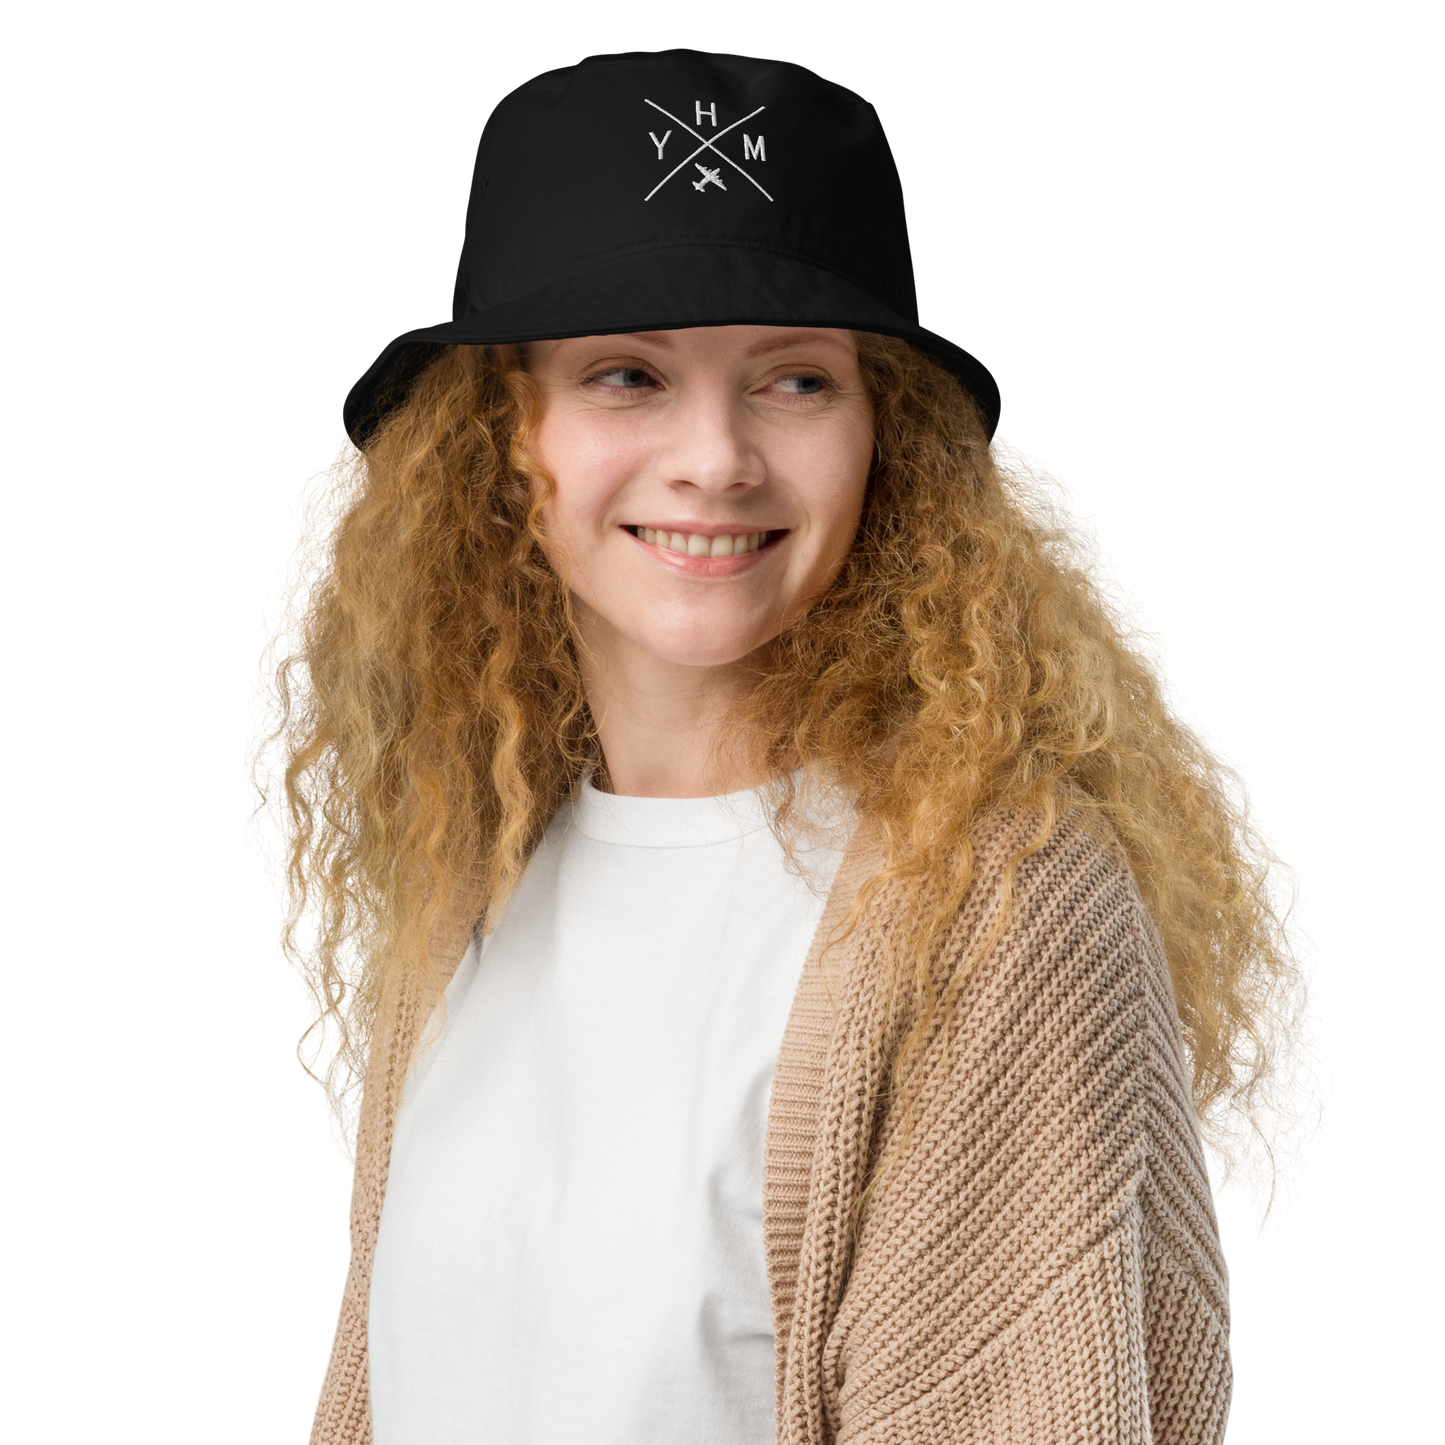 YHM Designs - YHM Hamilton Organic Cotton Bucket Hat - Crossed-X Design with Airport Code and Vintage Propliner - White Embroidery - Image 04